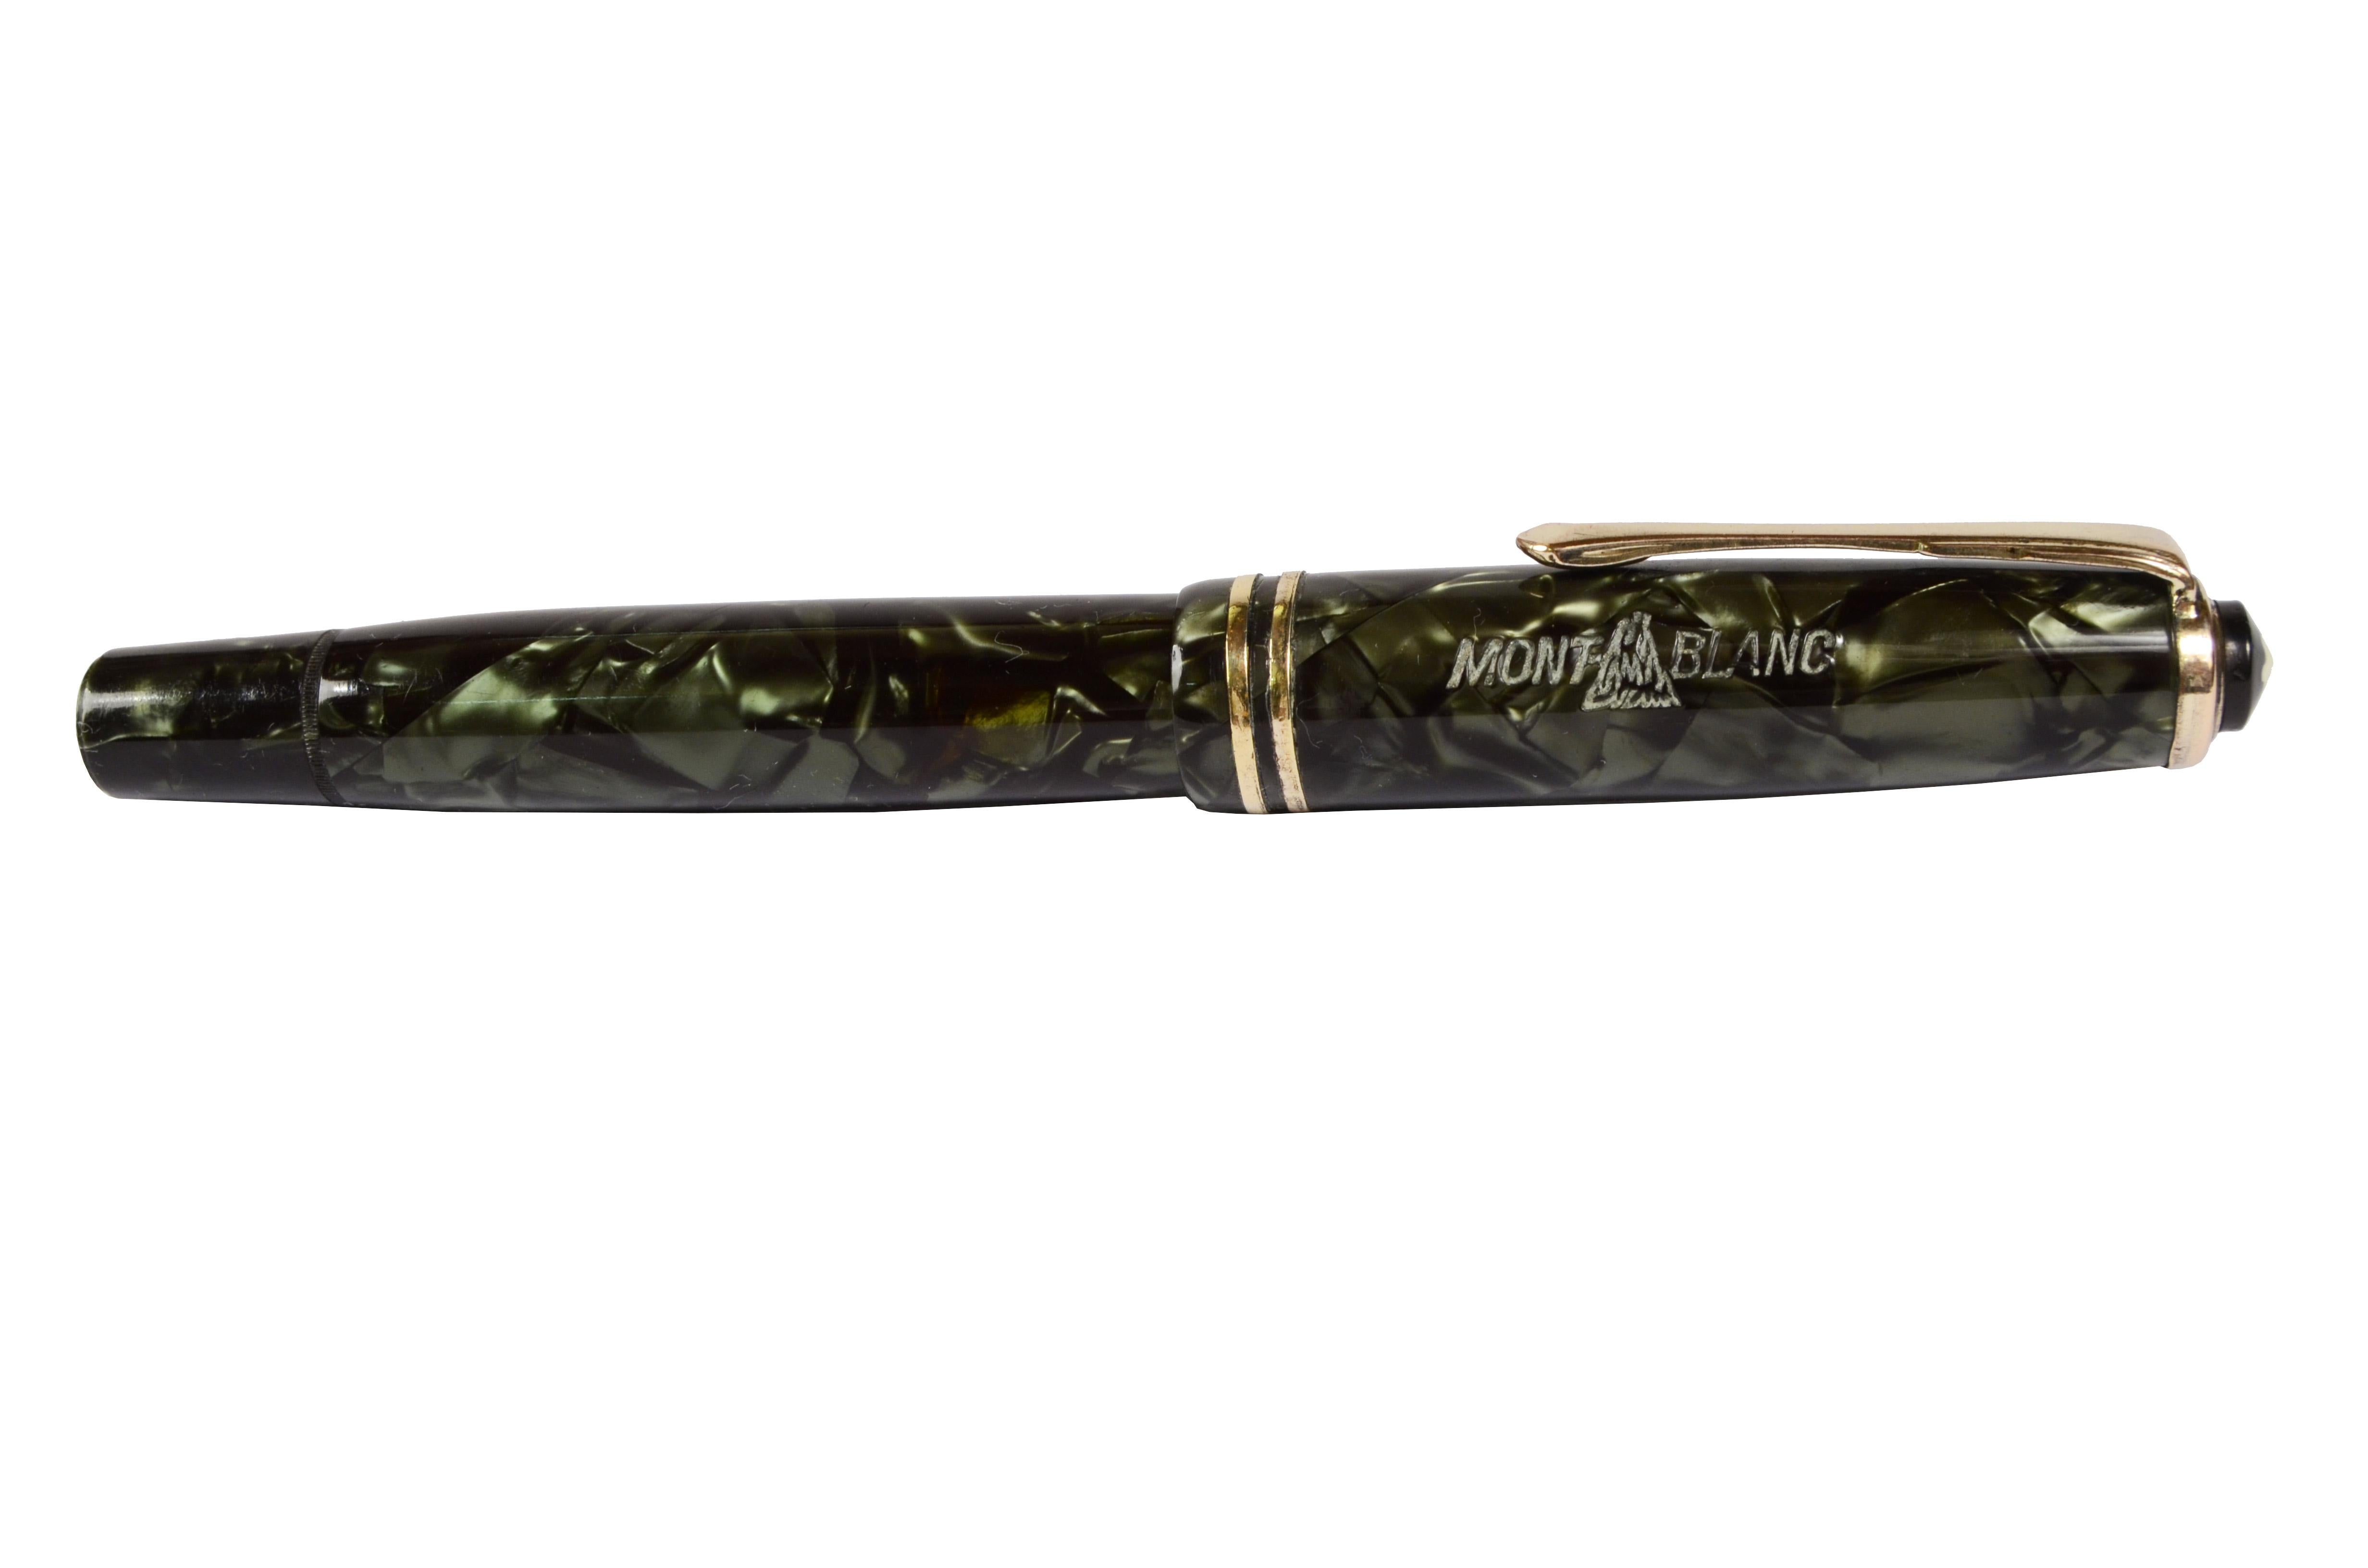 Montblanc Meisterstuck 244 EF dark green marbled celluloid fountain pen, Danish made, produced between 1941 and 1954 piston filling, original Montblanc nib n. 4 in 14-karat gold. 
The 24x series was a mid-tier offering, as indicated in the 